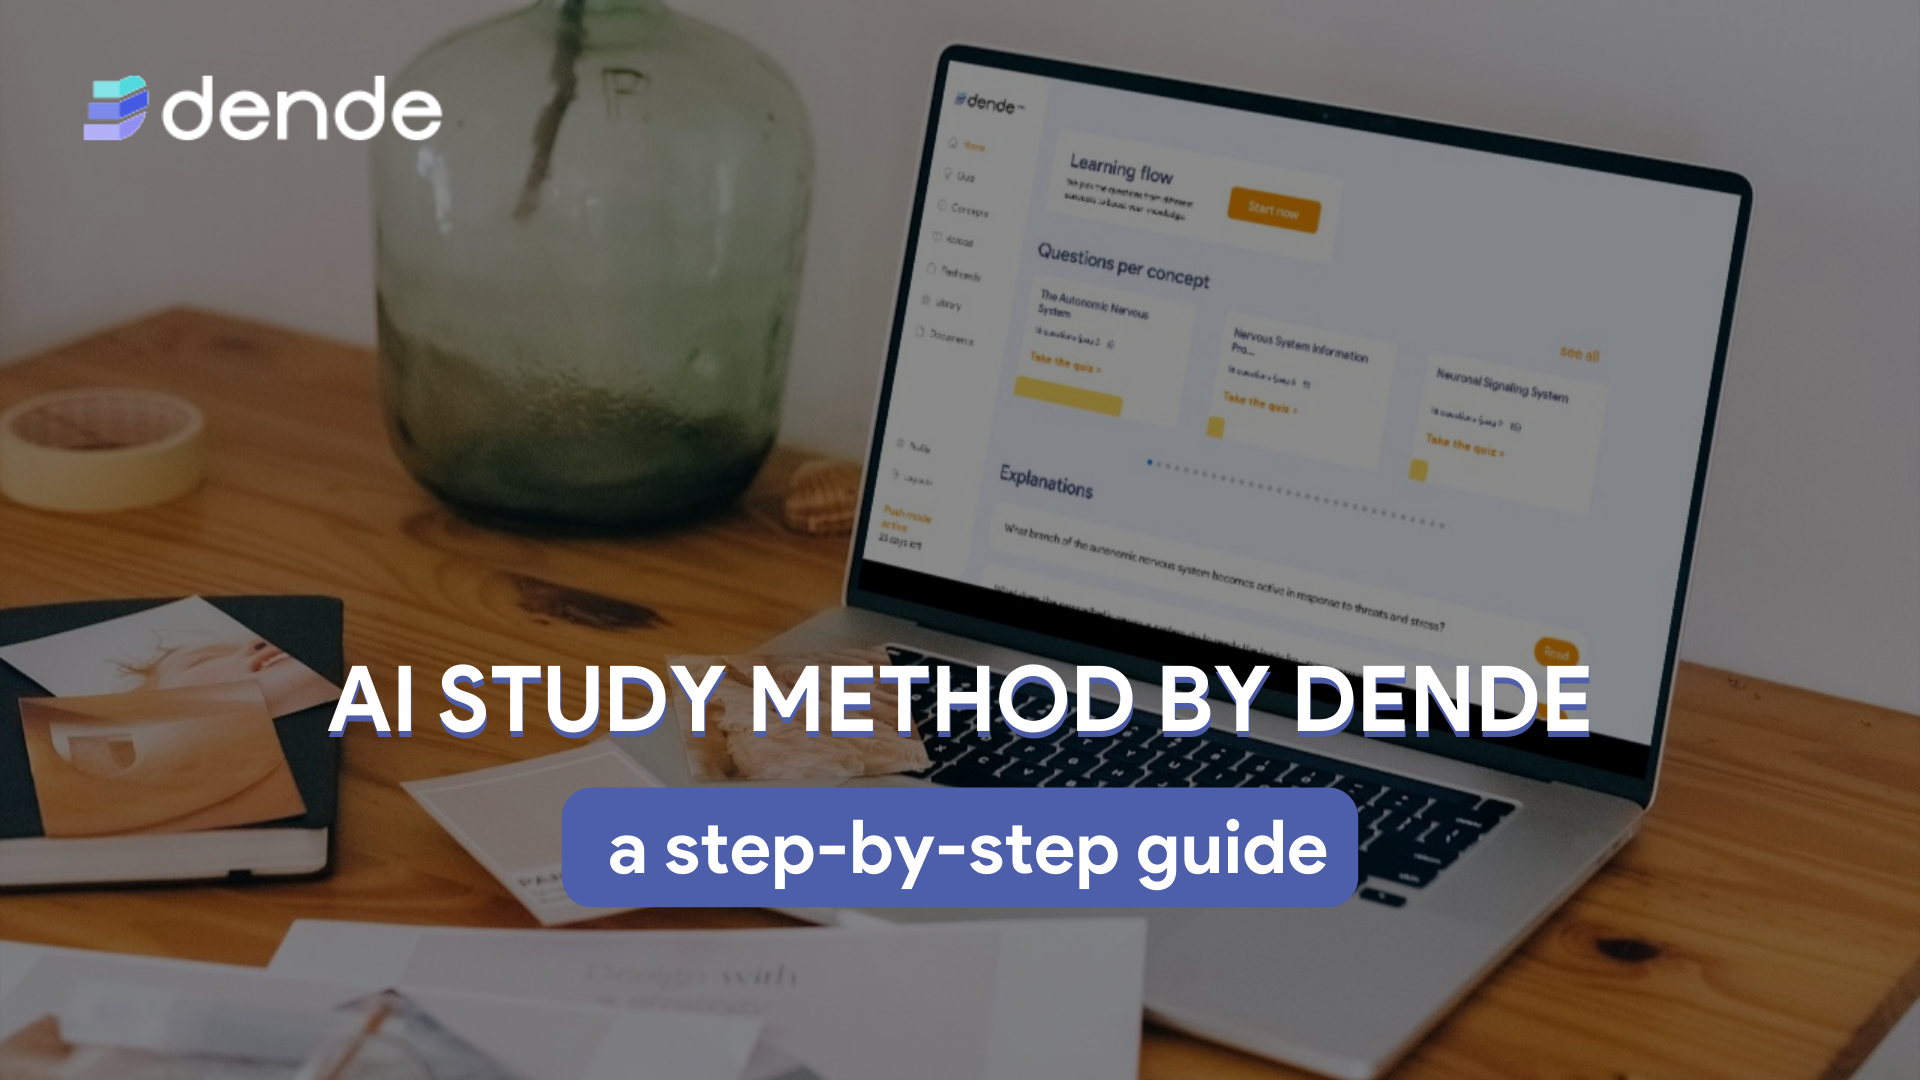 AI study method by dende: a step-by-step guide